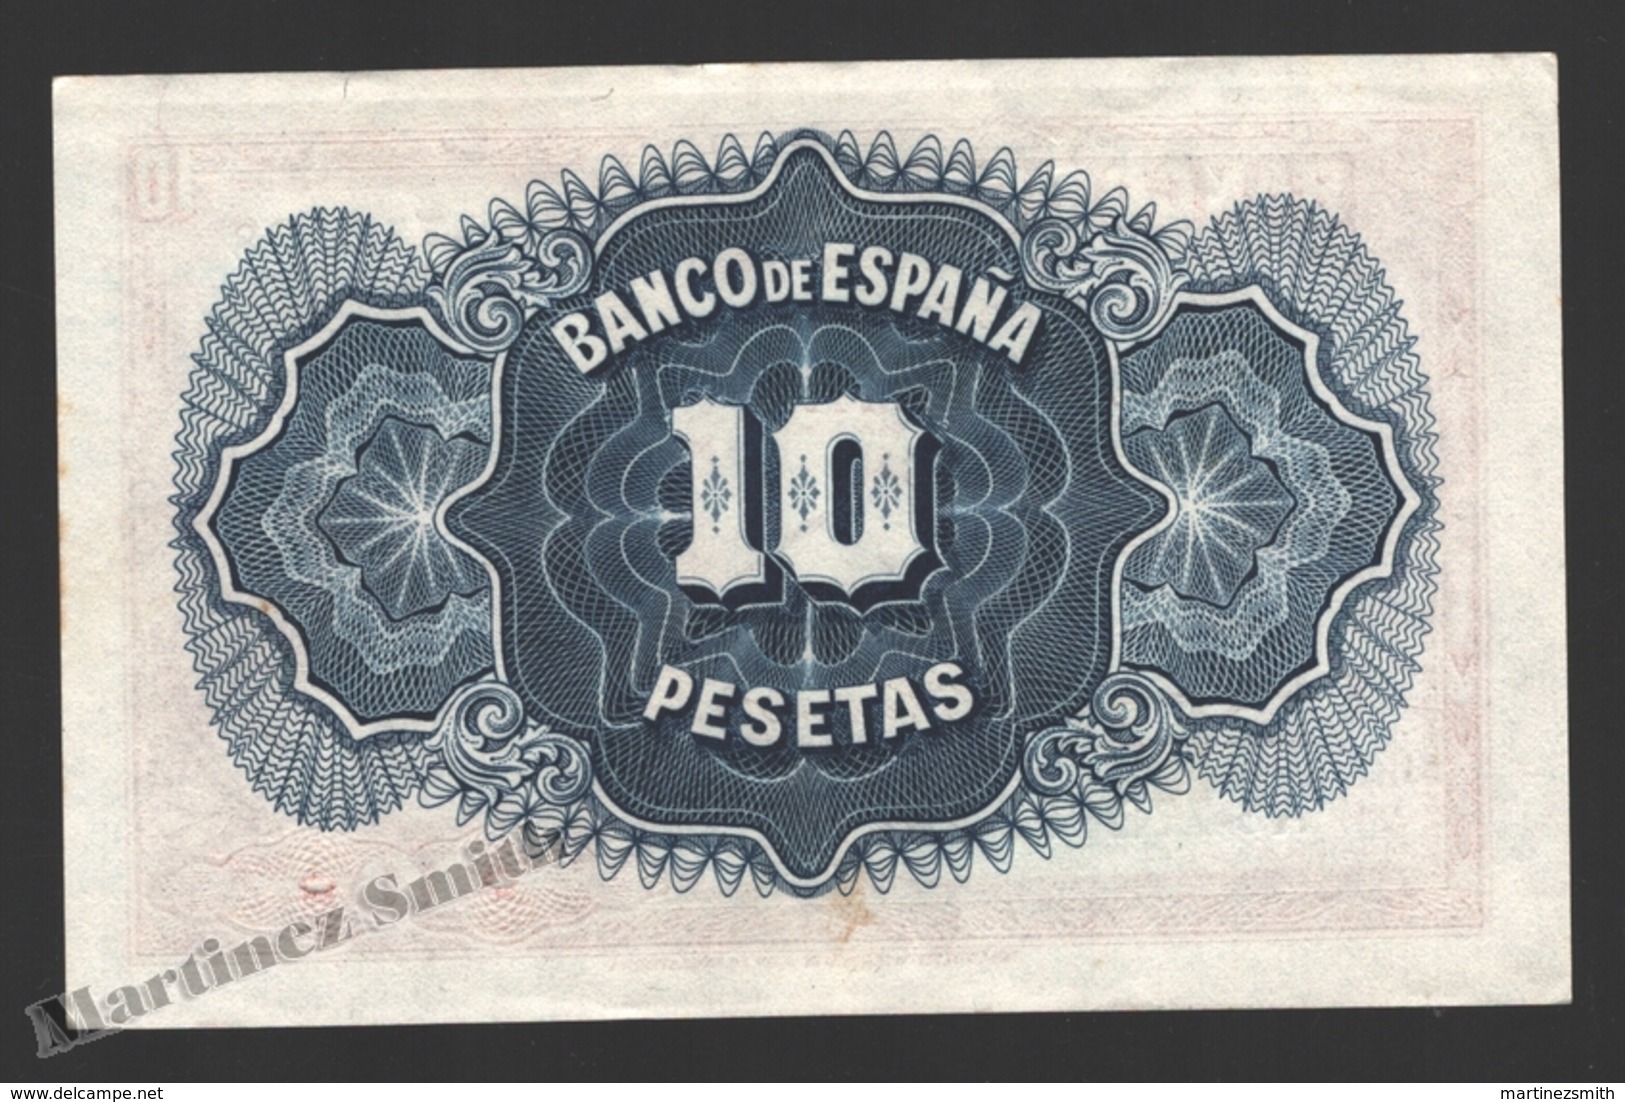 Banknote Spain -  10 Pesetas – Year 1935 – Women At Right - Condition VF - Pick 86a Letter A - 5 Pesetas